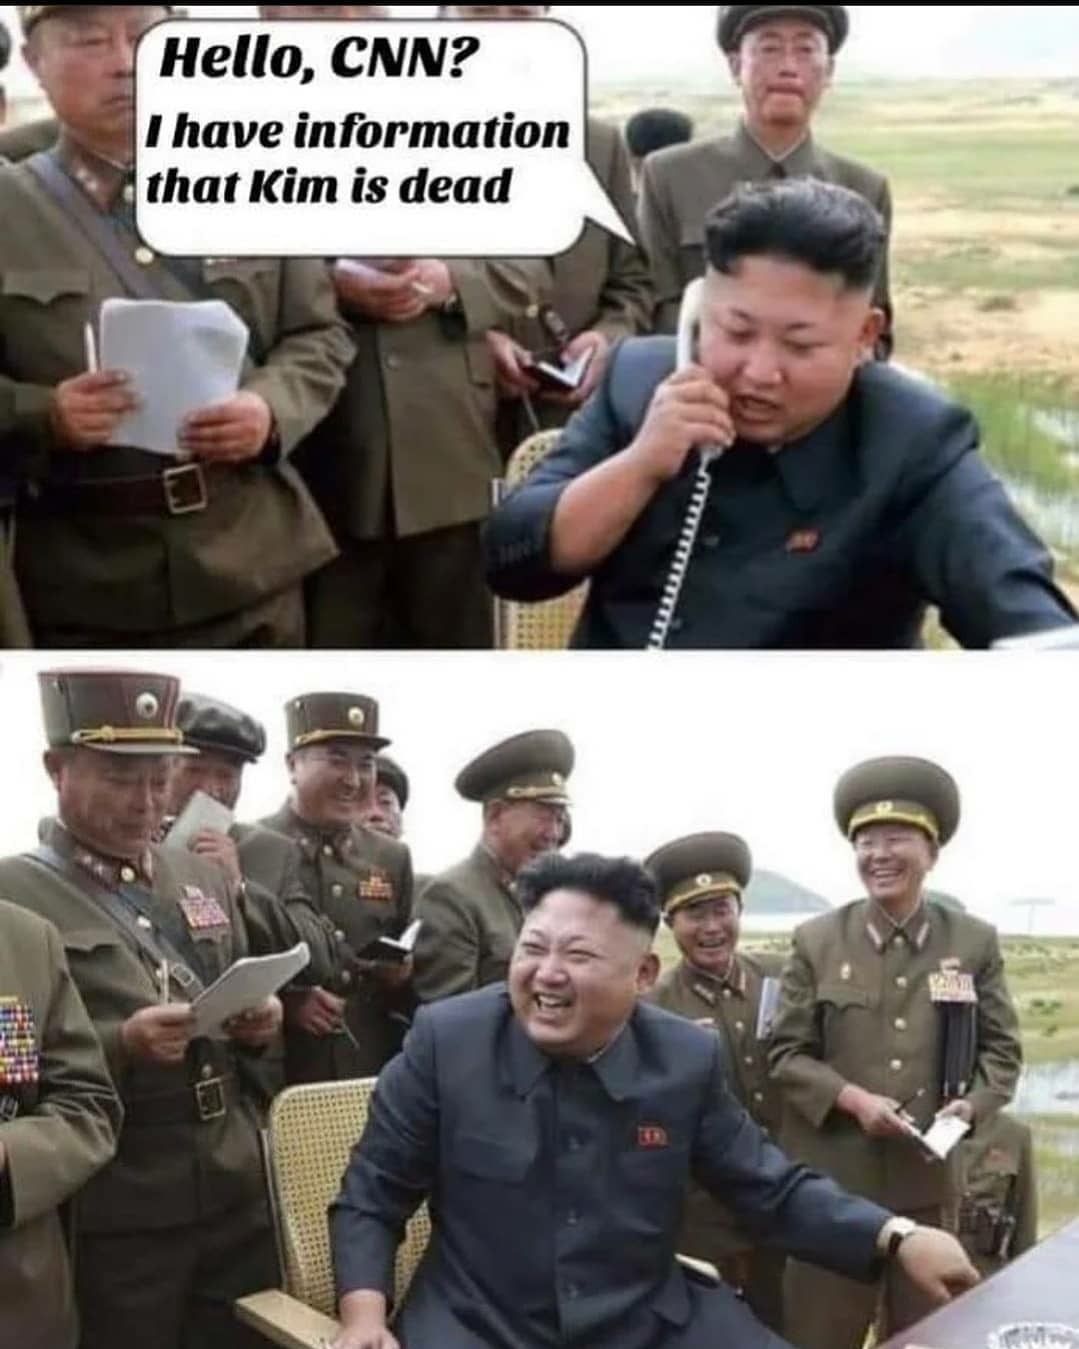 Supreme leader knows how to pull pranks